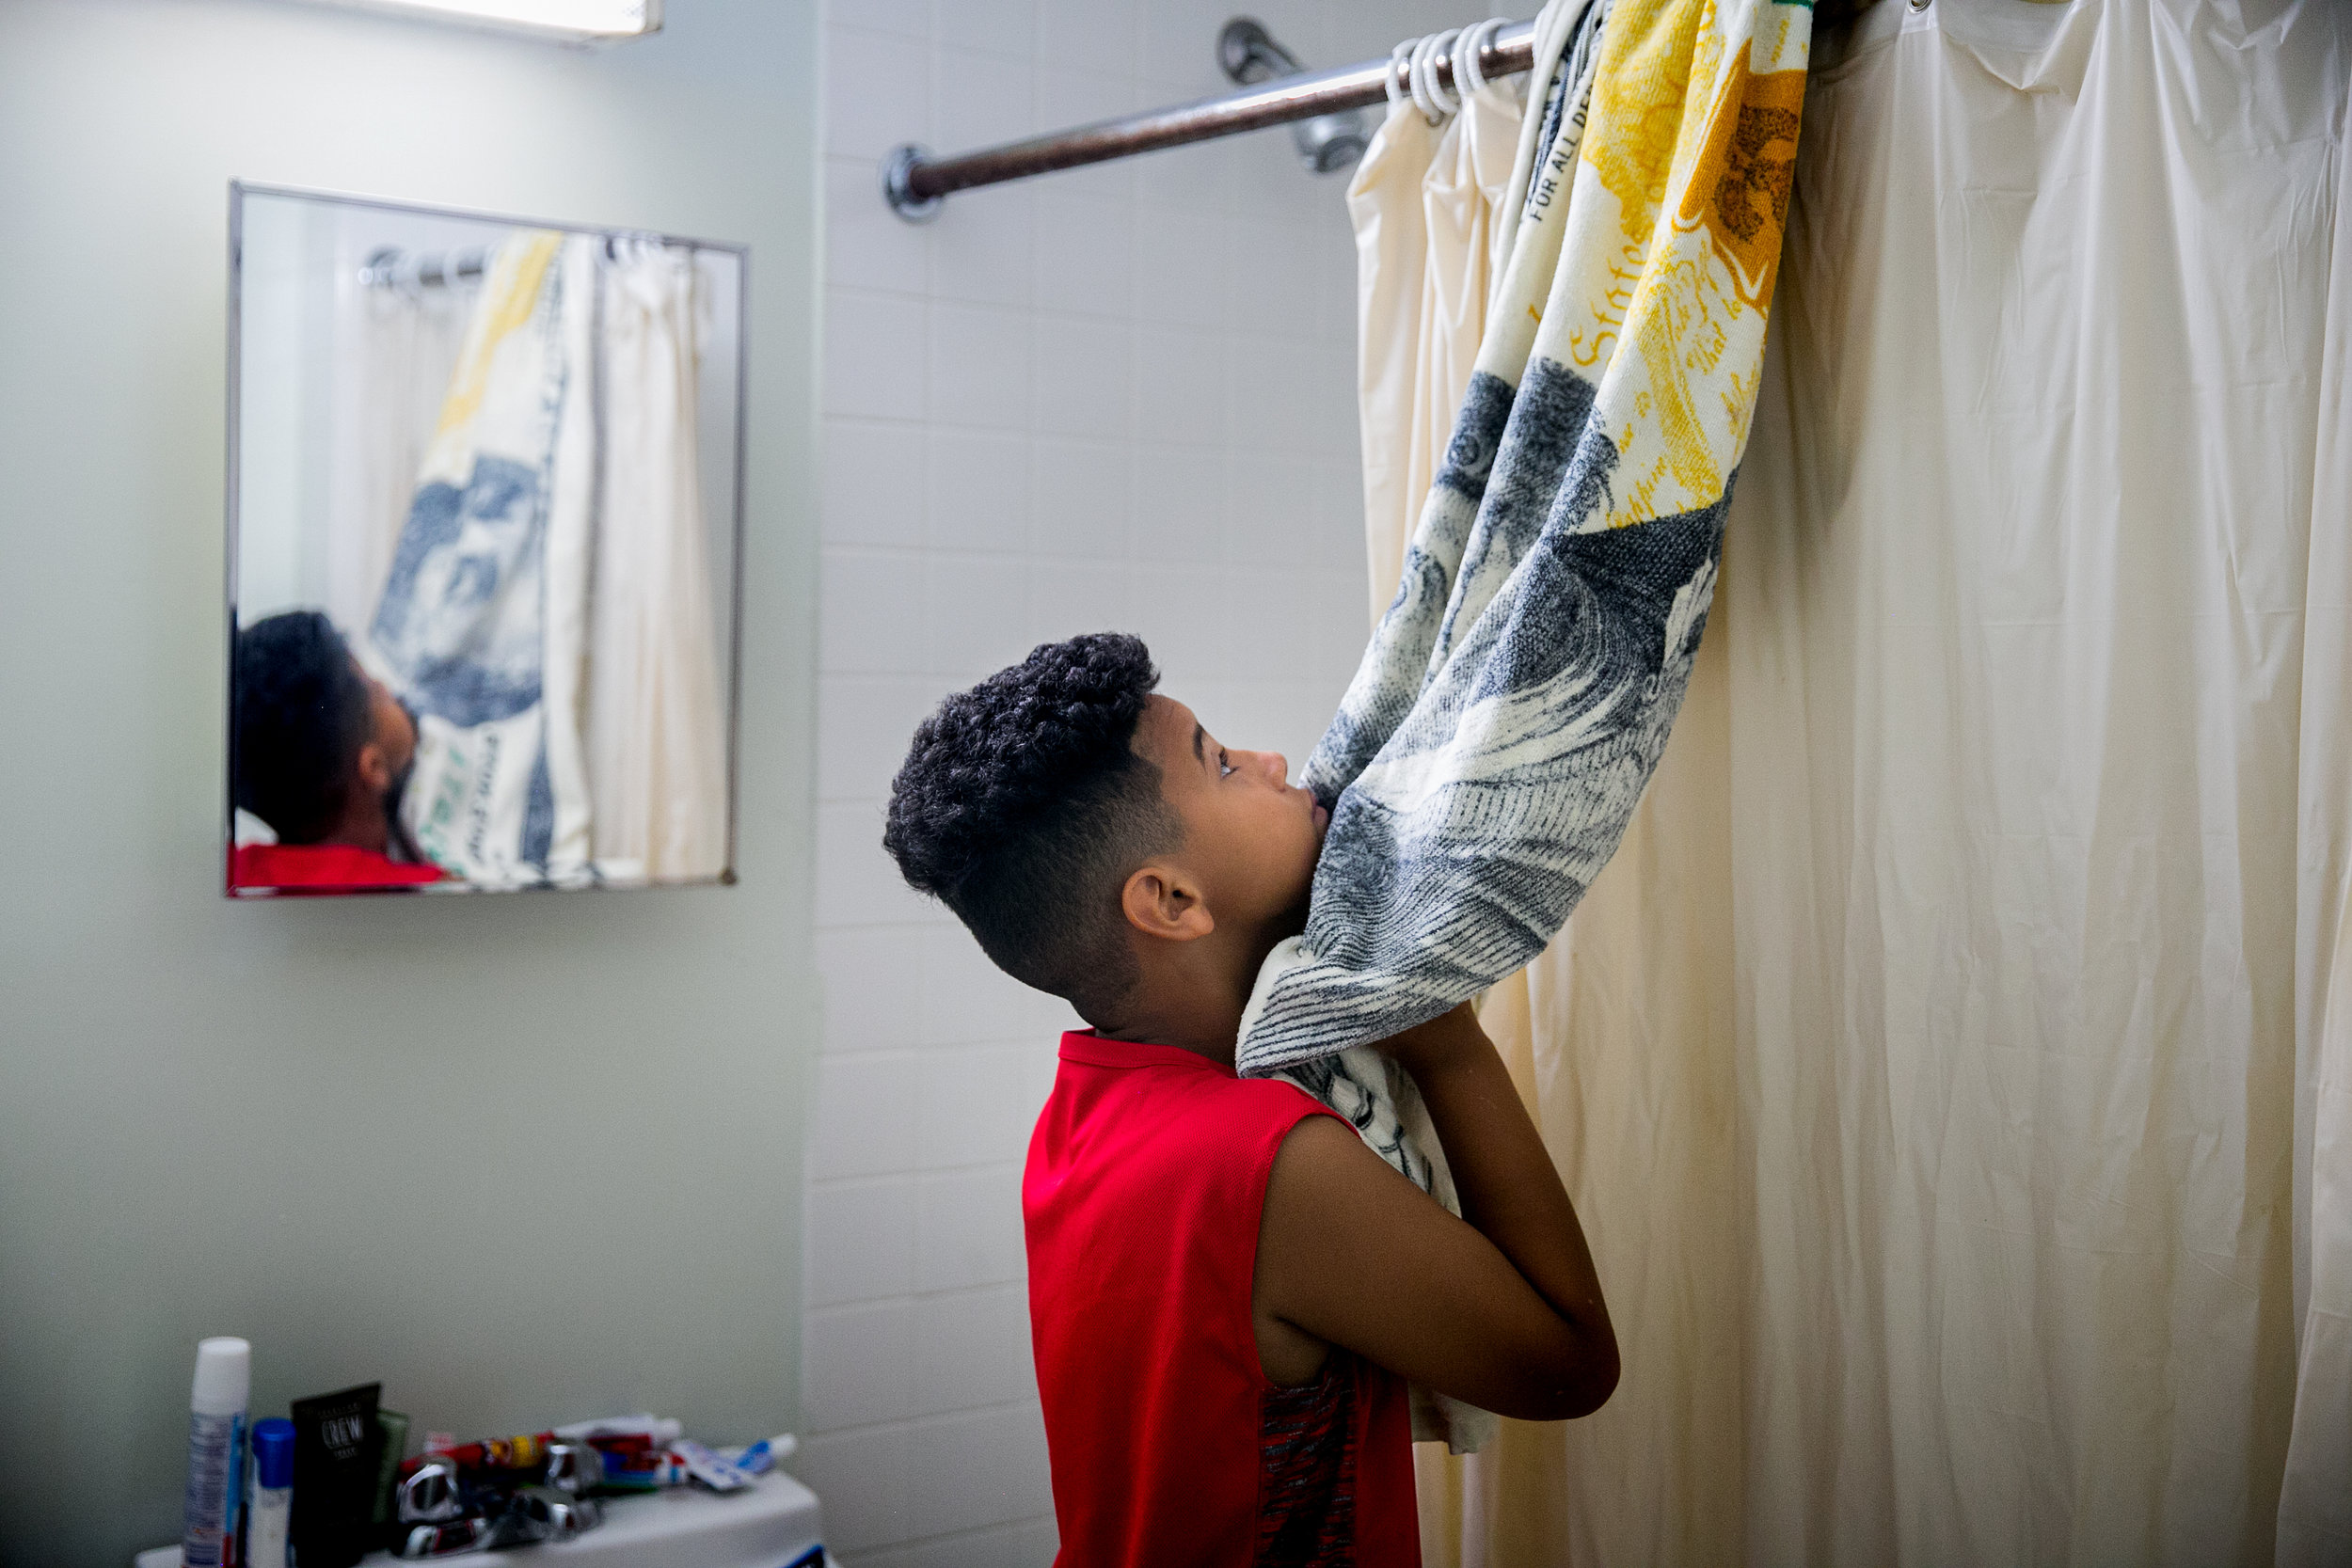  Pedro Cordero Jr. prepares for his day inside the room he shares with his father Pedro Cordero at a homeless shelter in Brooklyn, New York 